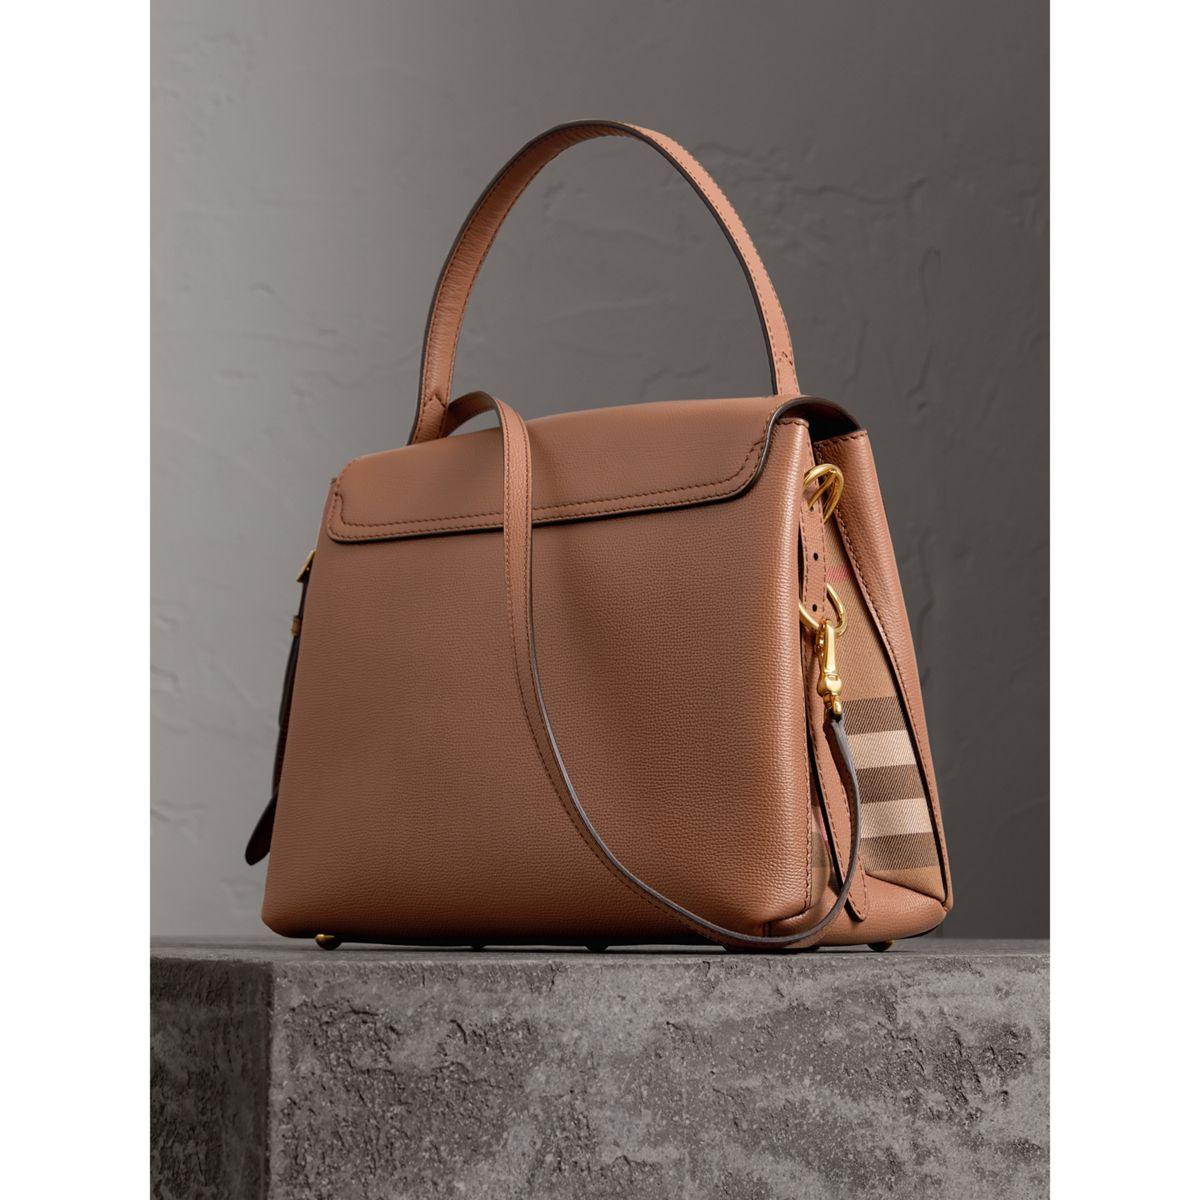 Burberry Small Grainy Leather And House Check Tote Bag | in Brown | Lyst